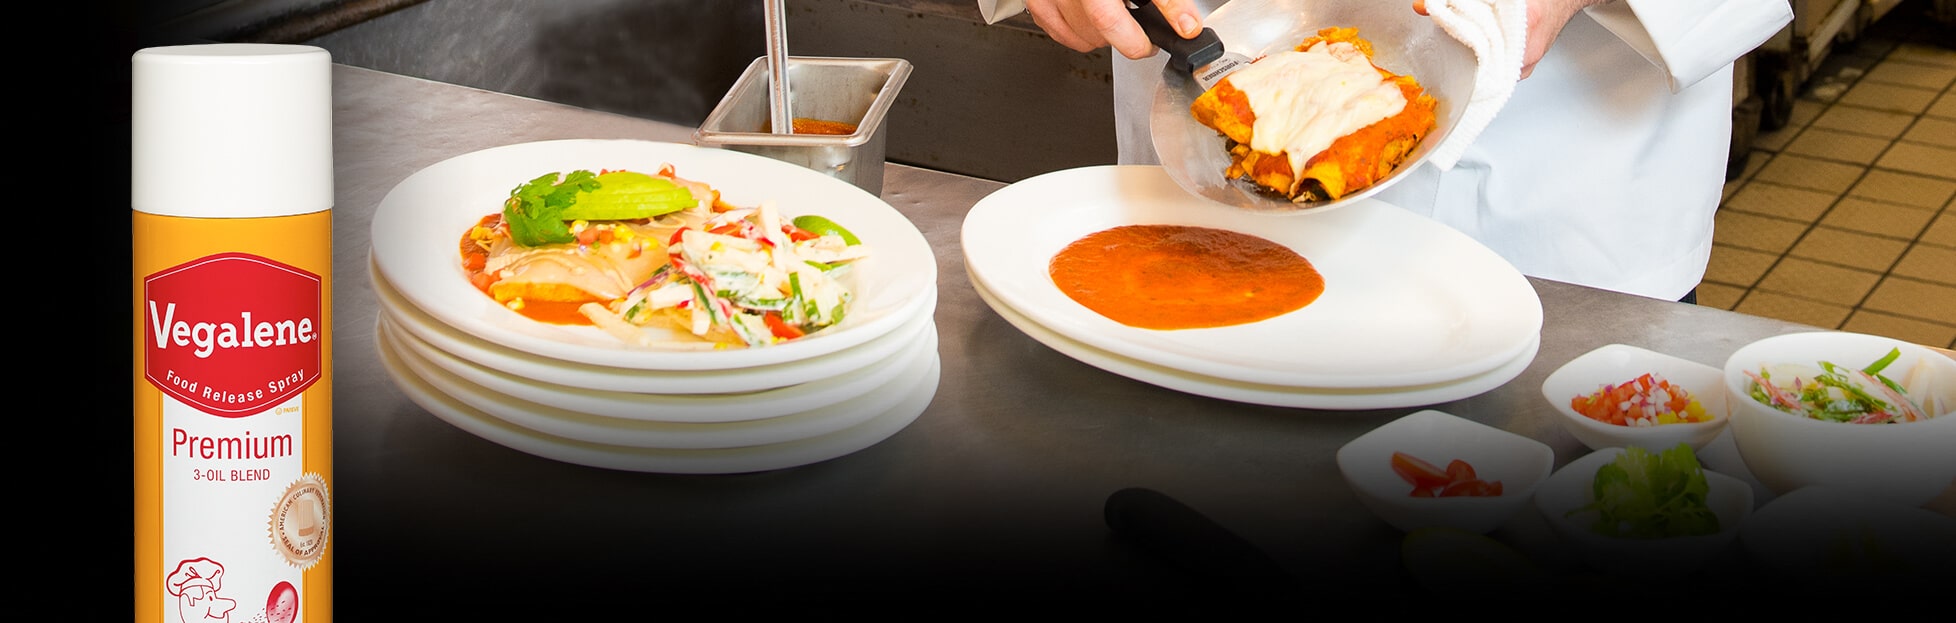 Craft. Cook. Cleanup. Foodservice made simple.